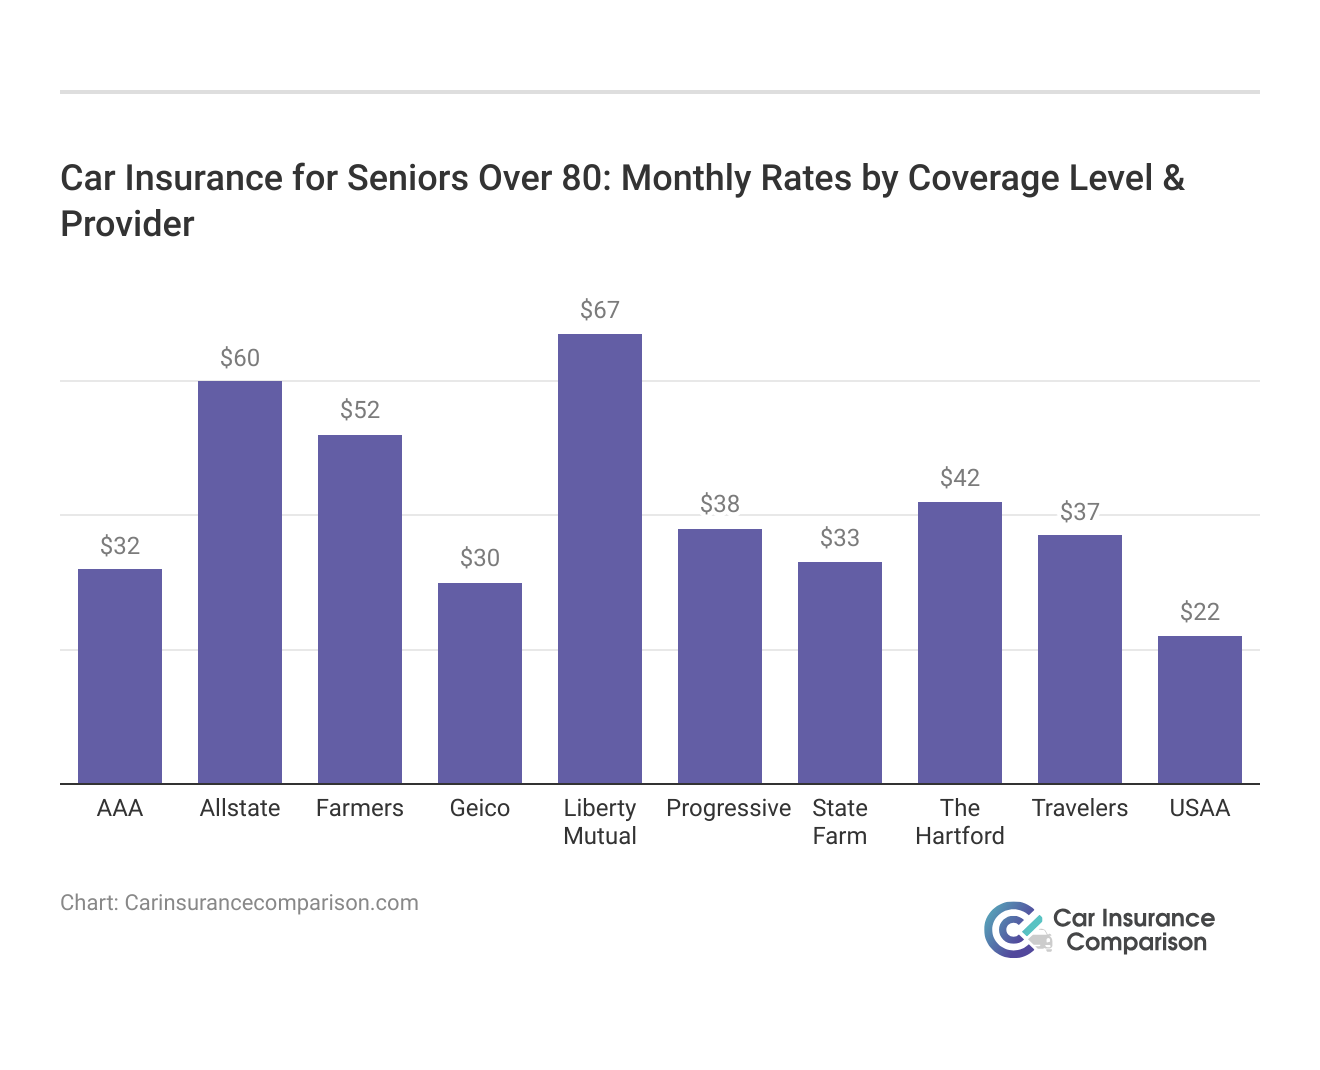 <h3>Car Insurance for Seniors Over 80: Monthly Rates by Coverage Level & Provider</h3>